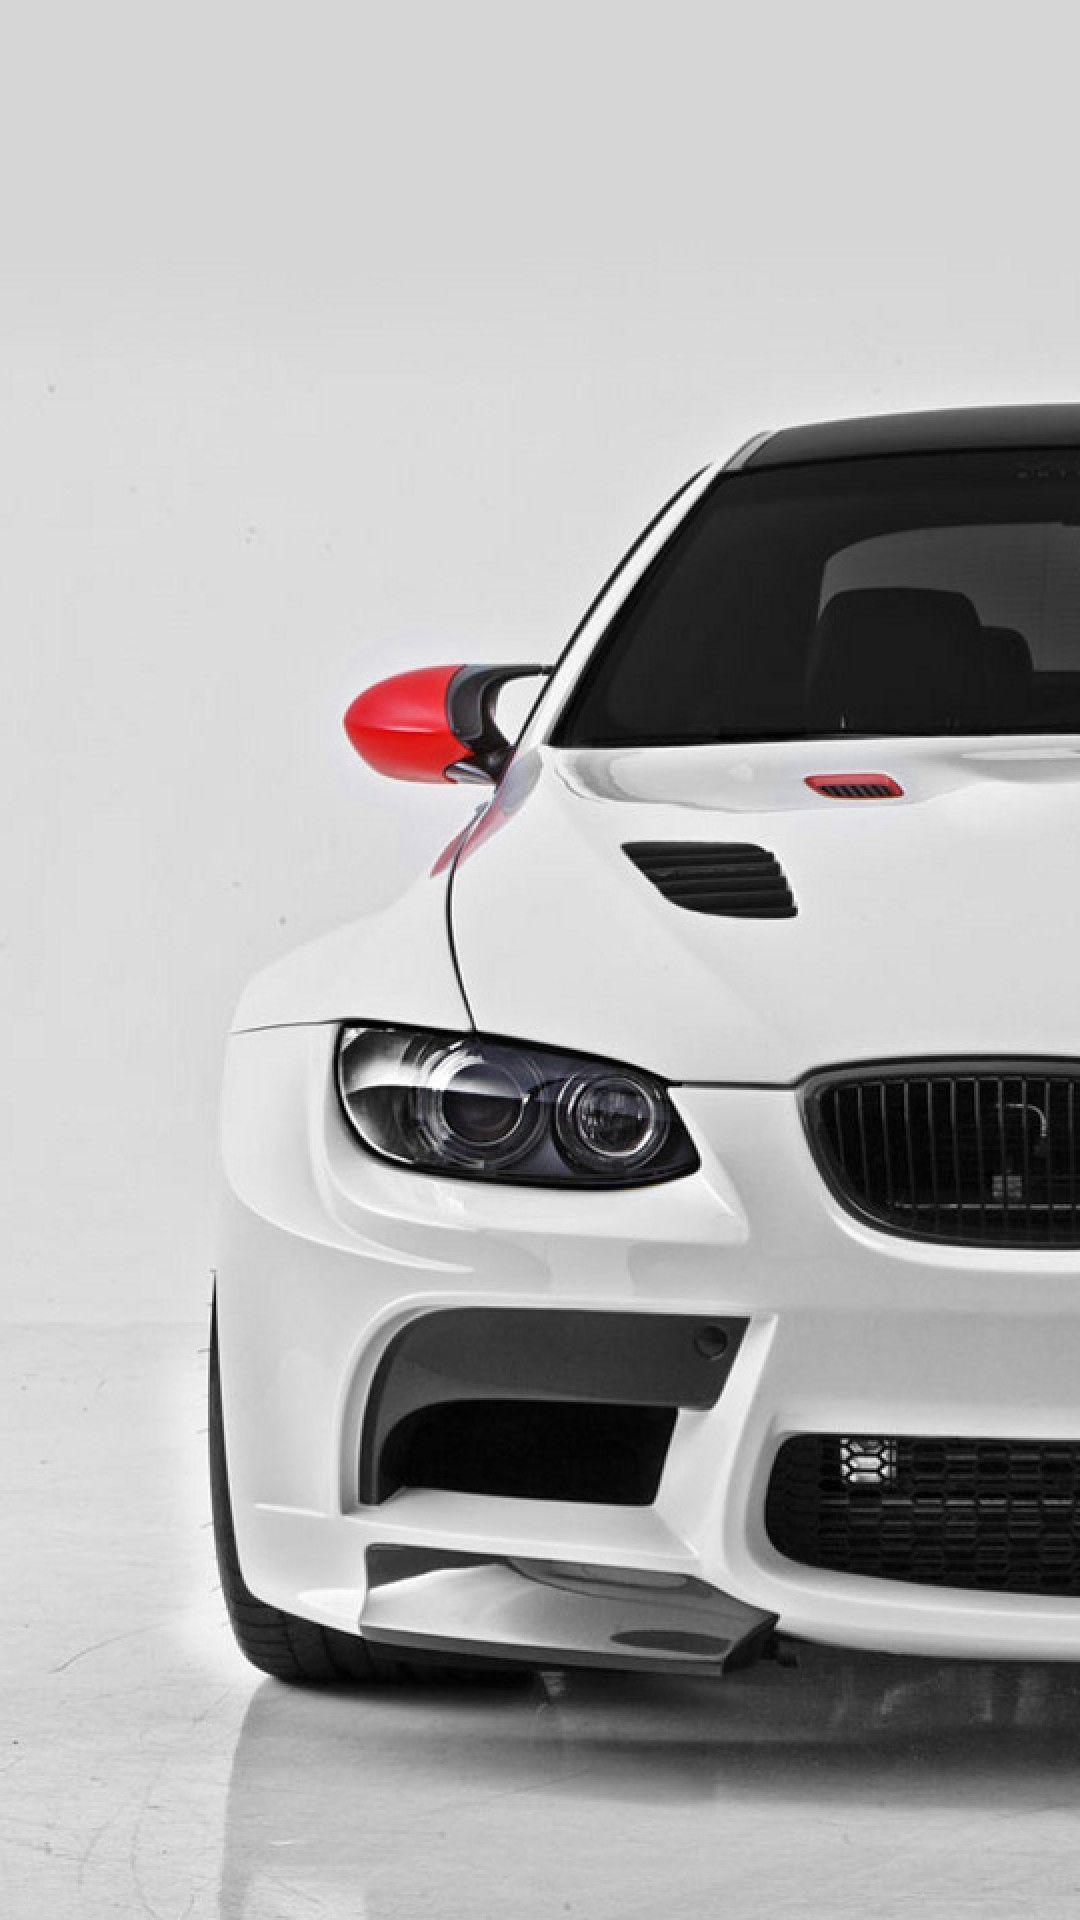 Bmw iphone wallpapers Group